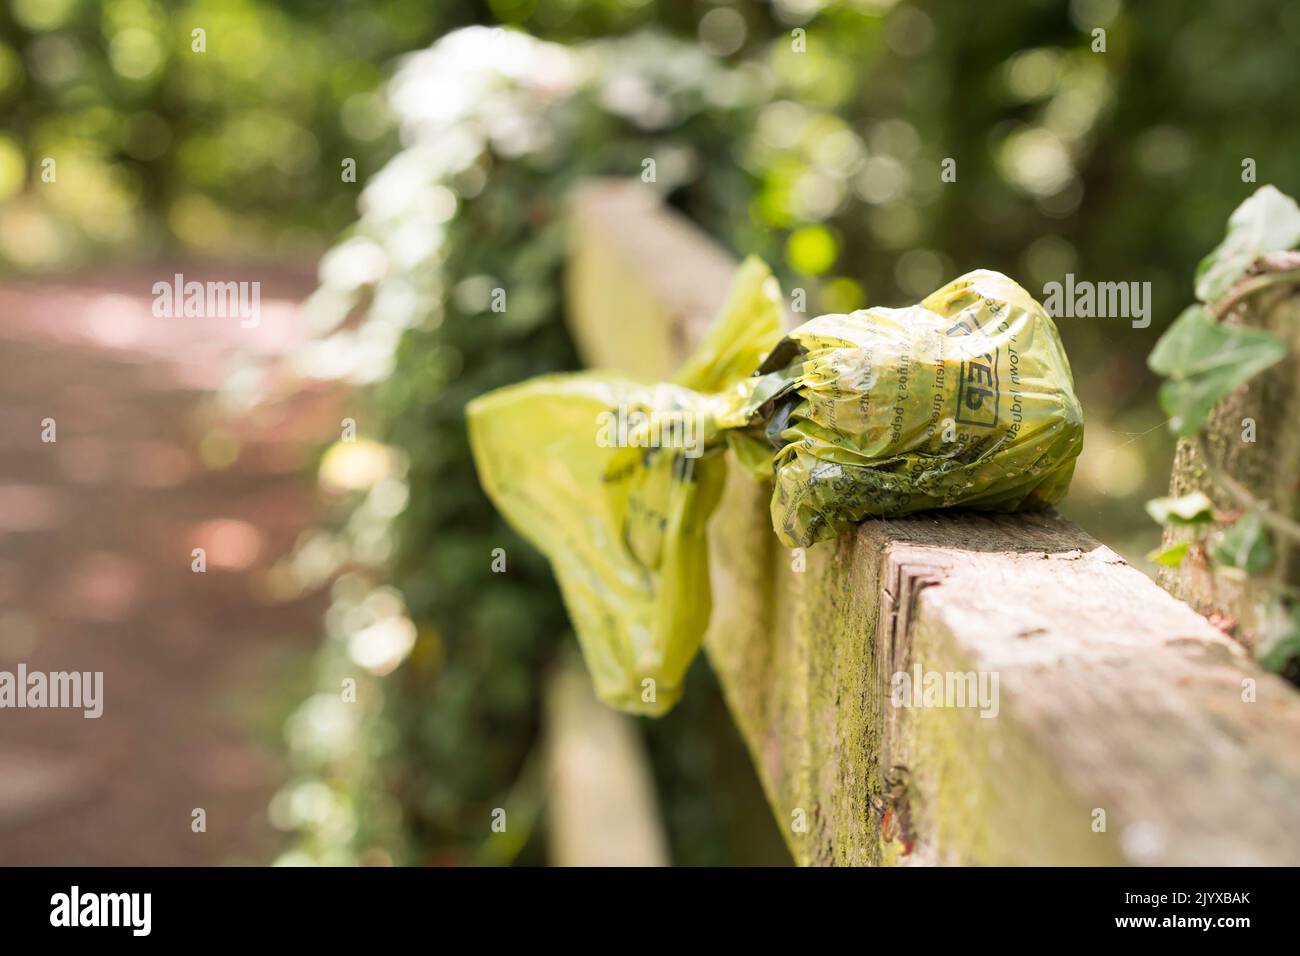 Close up, isolated plastic bag of dog poo kindly left by irresponsible dog owners on wooden fencing in rural beauty spot, UK country park. Stock Photo